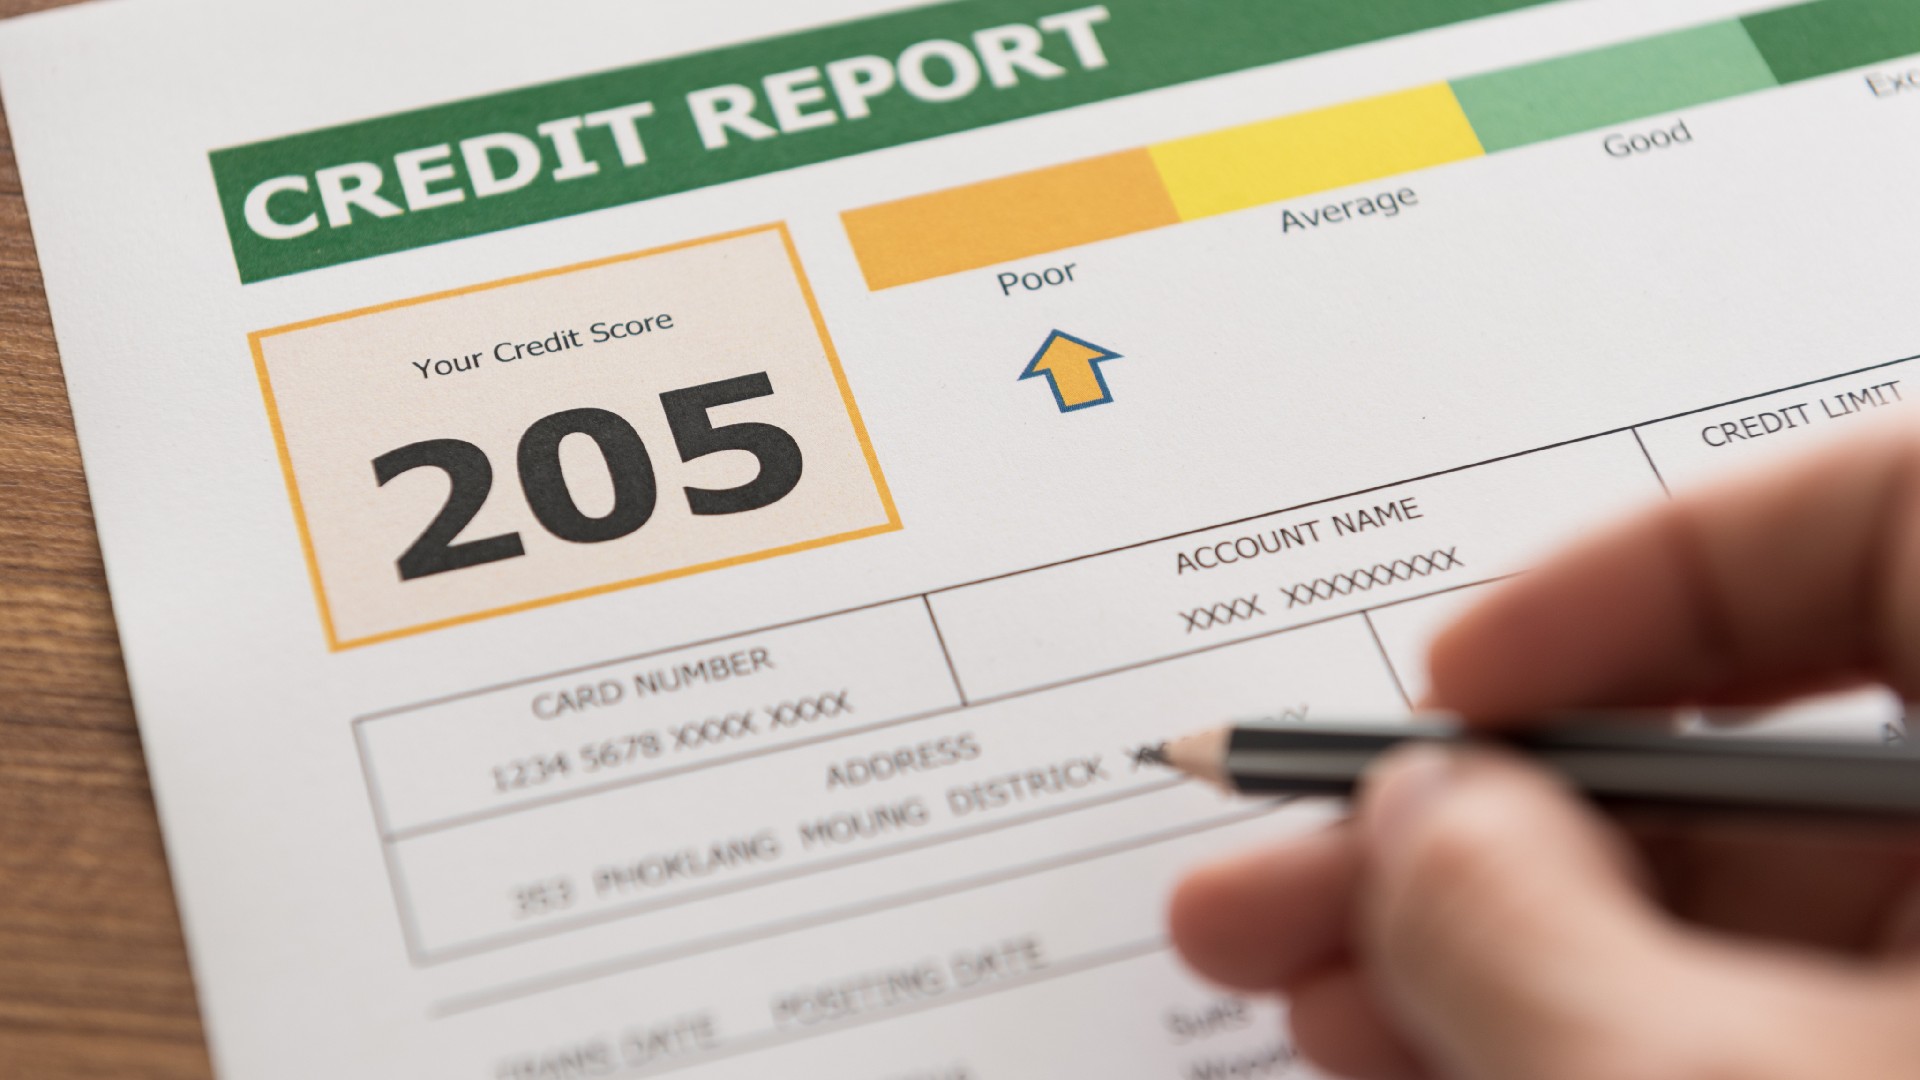 A poor credit score report for Consumer Credit Counseling in Texas